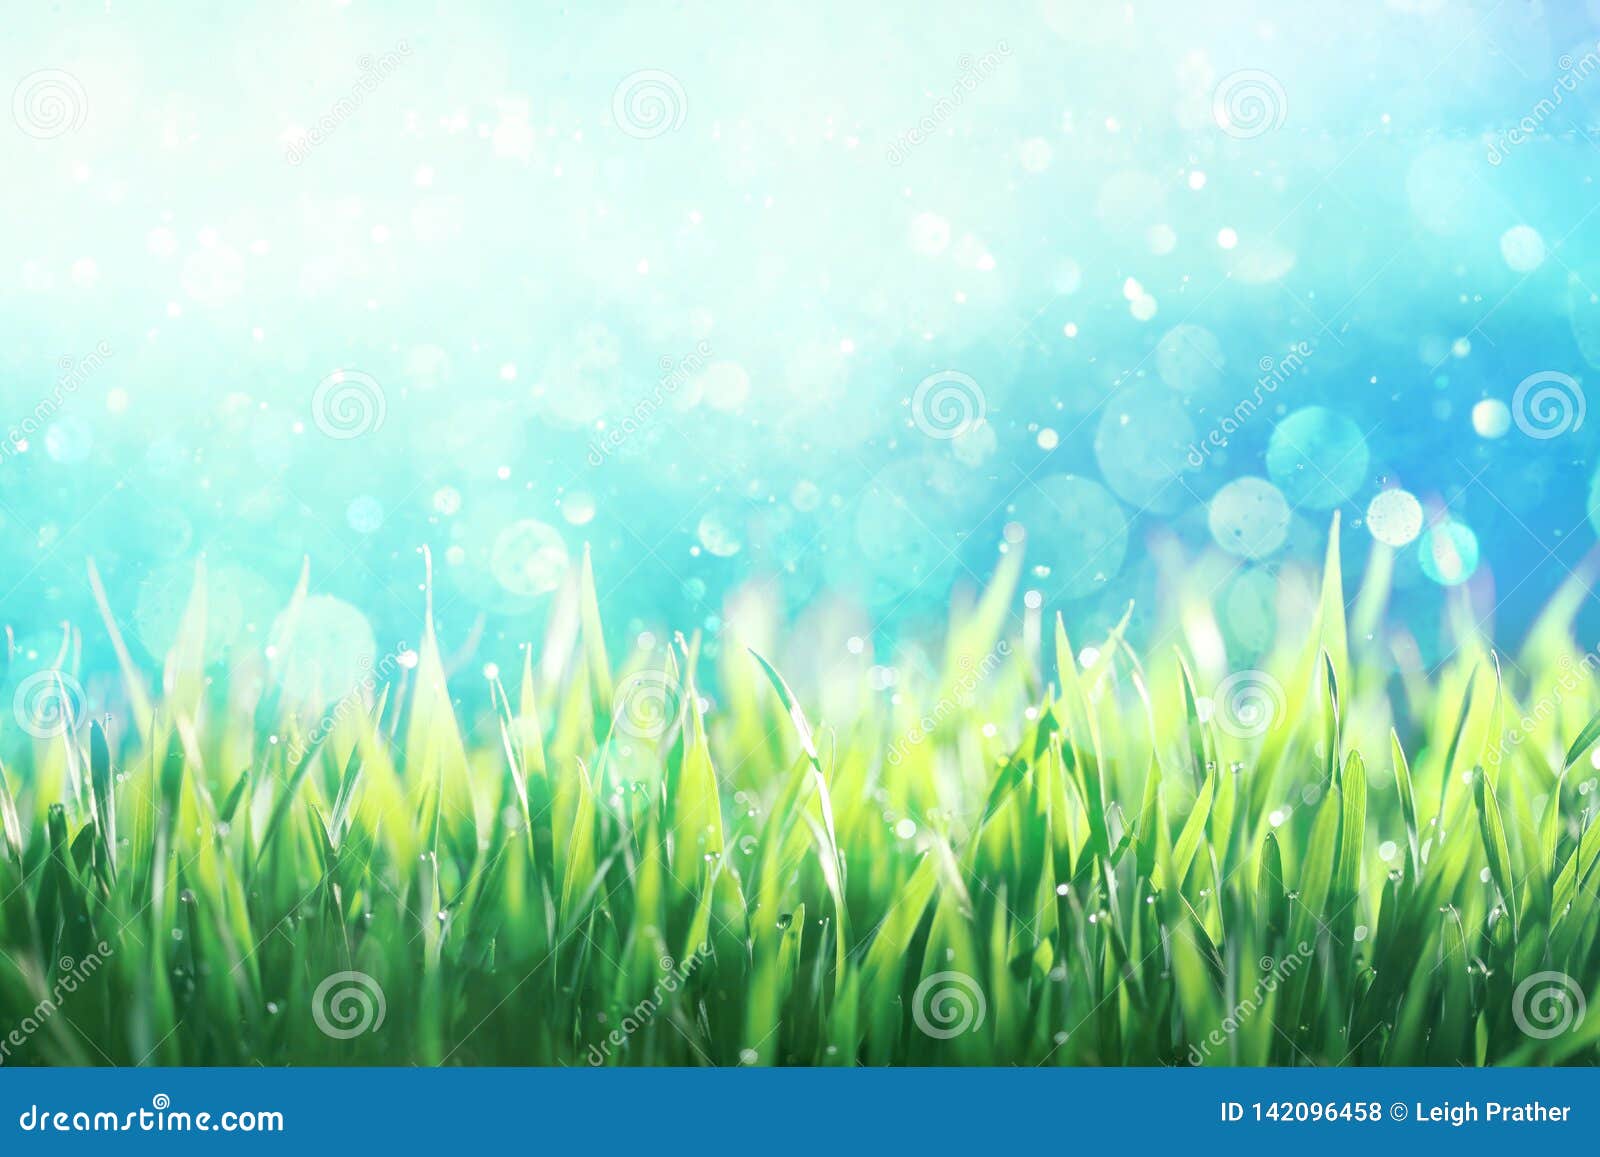 Dew Covered Green Grass Against Blue Sky Stock Photo - Image of grass